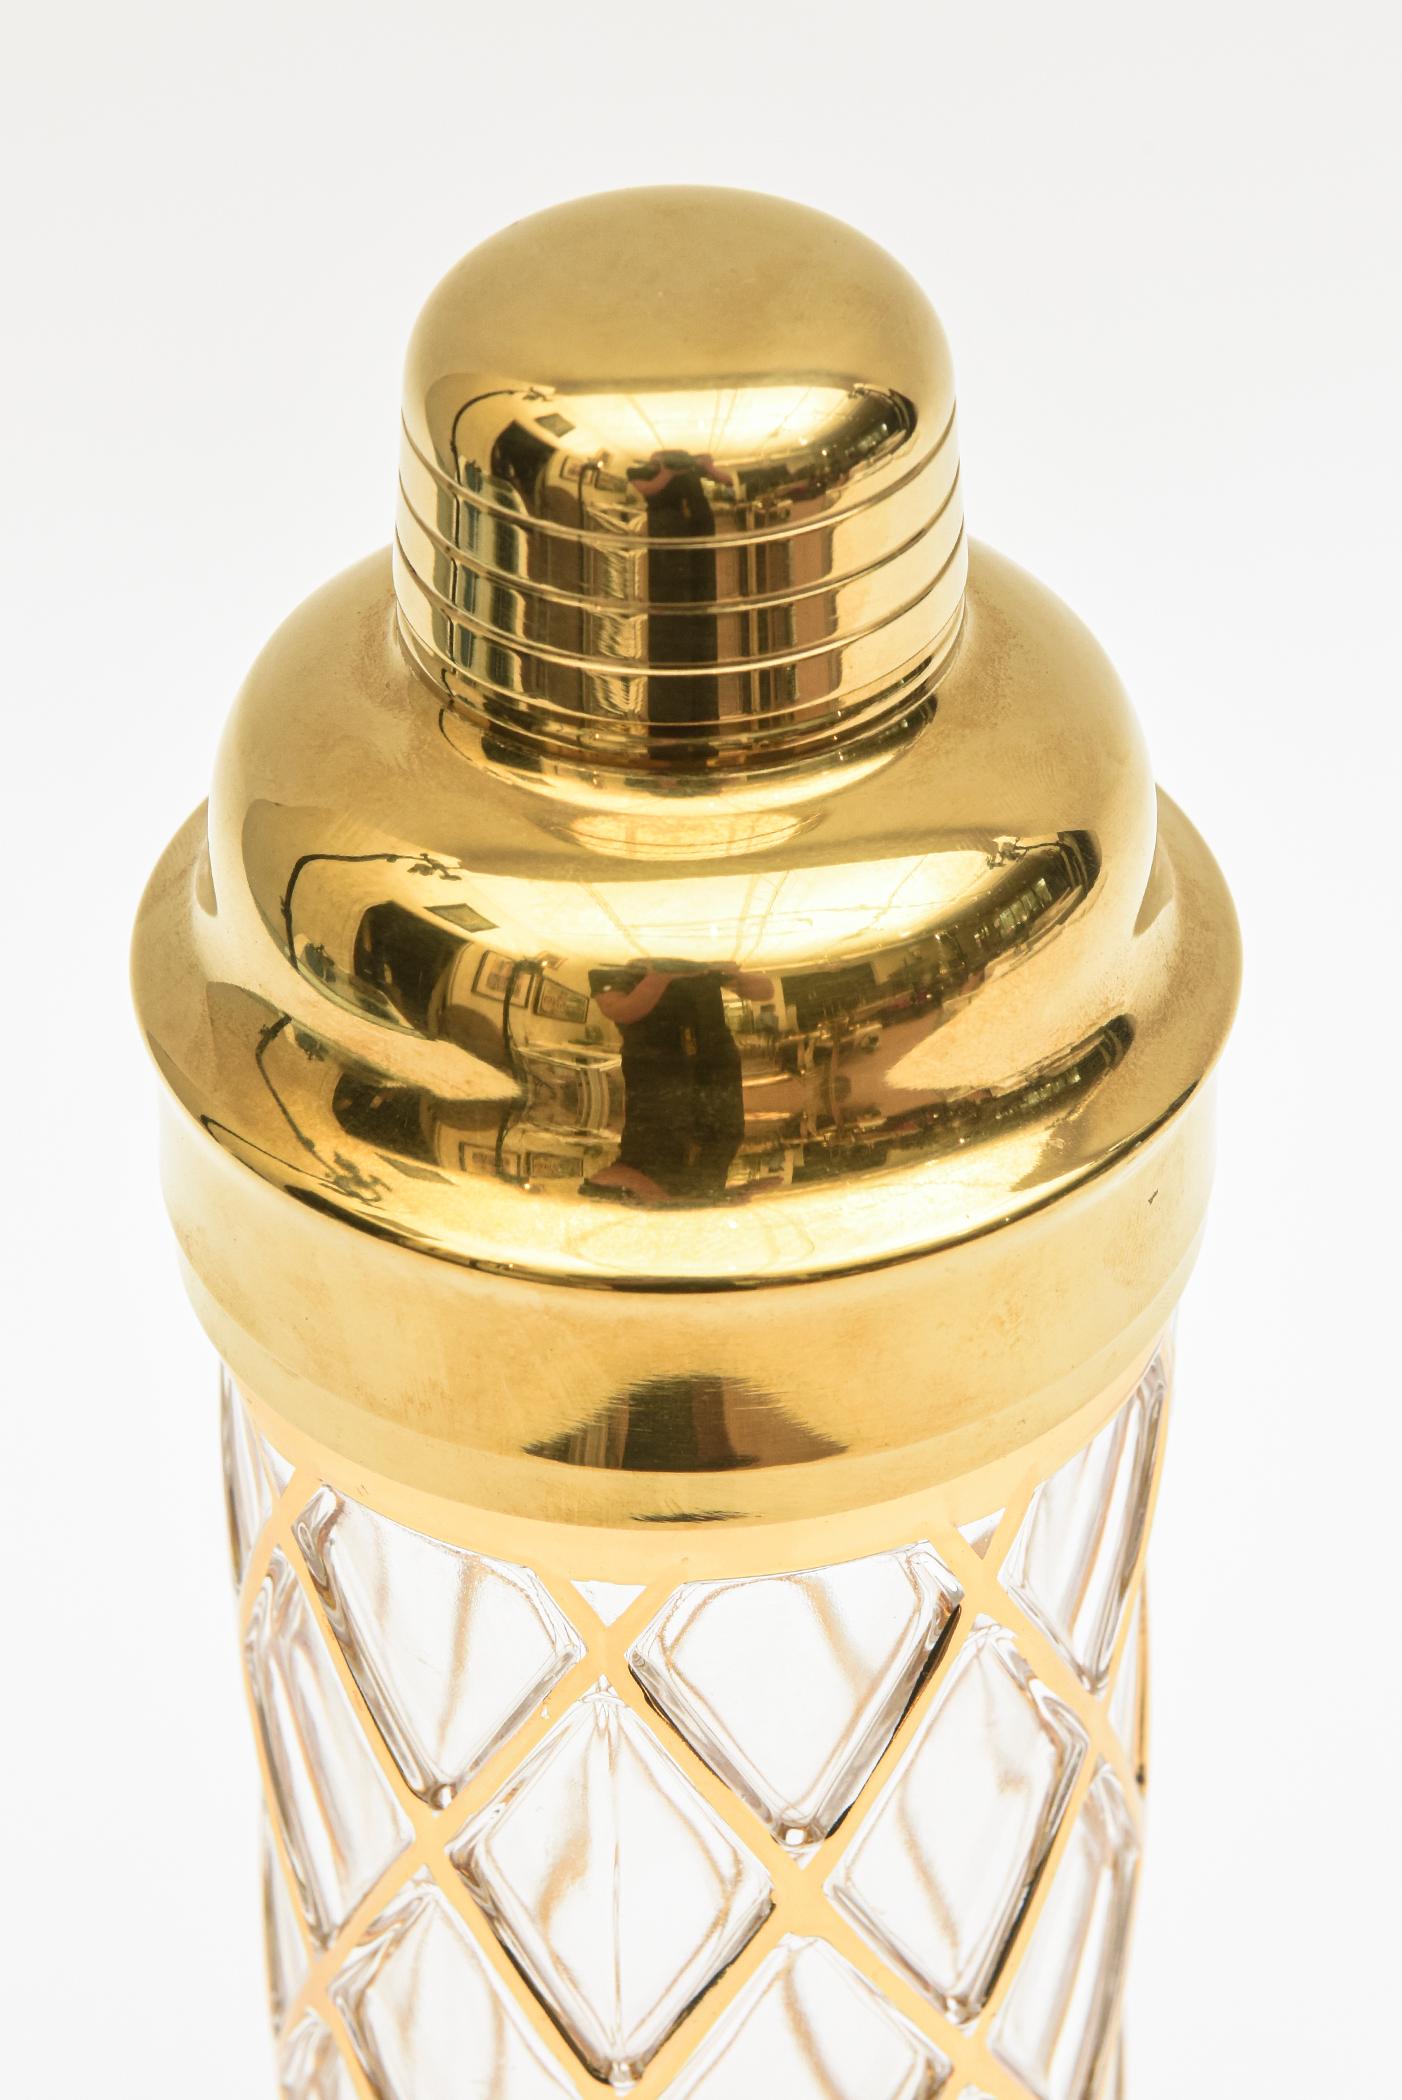 This chic 18 K gold overlay of a diamond pattern over glass cocktail shaker is signed Altuzarra. It is from 2010. Joseph Altuzarra is a well known and coveted fashion designer who started and launched his brand in NYC in 2008. He had a very multi